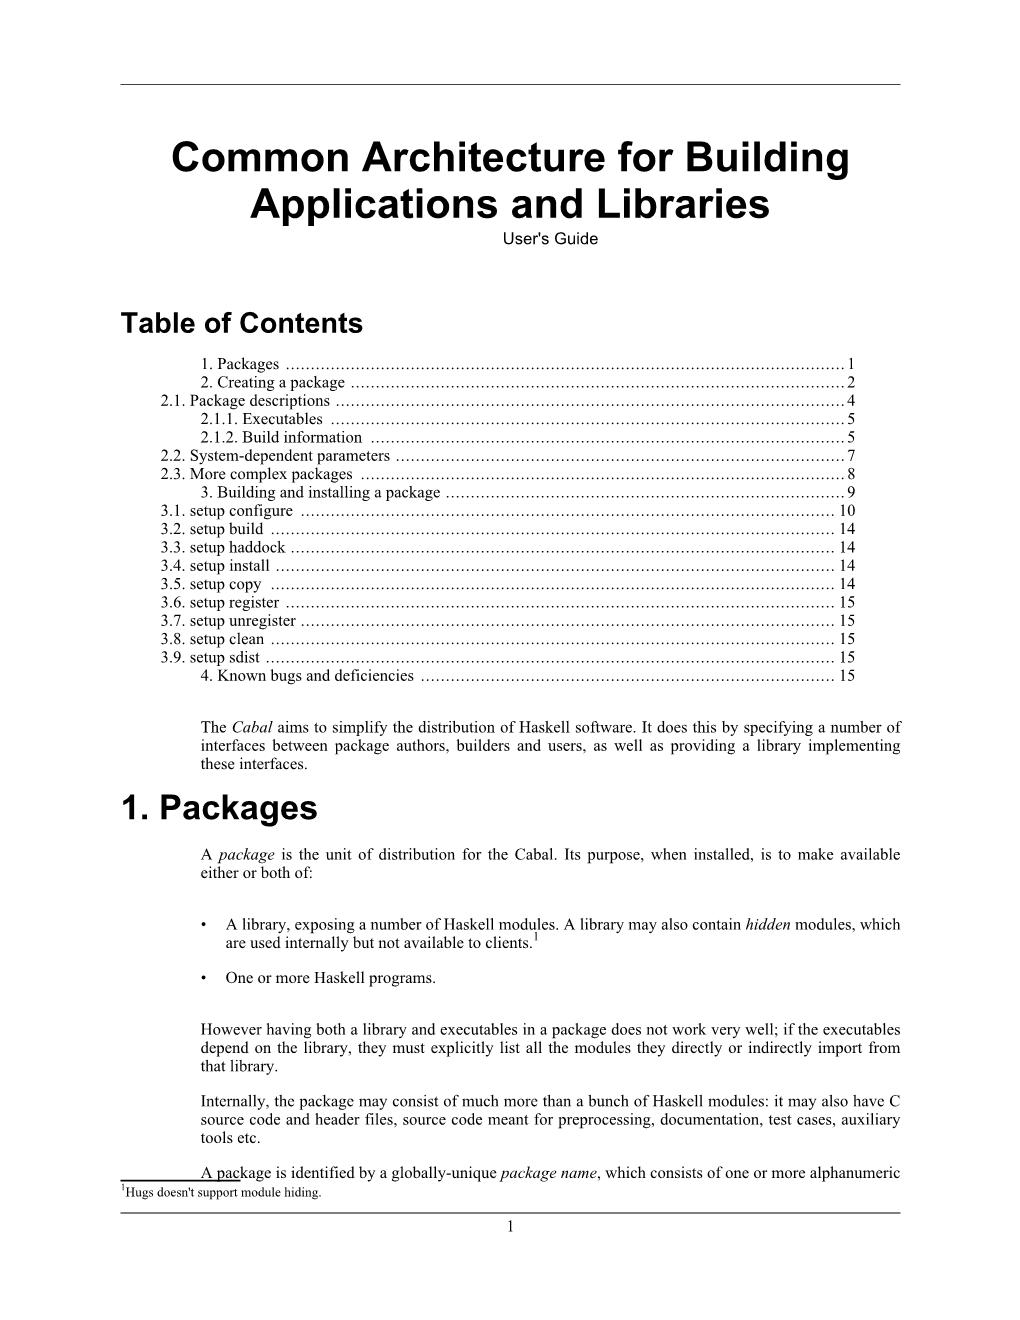 Common Architecture for Building Applications and Libraries User's Guide